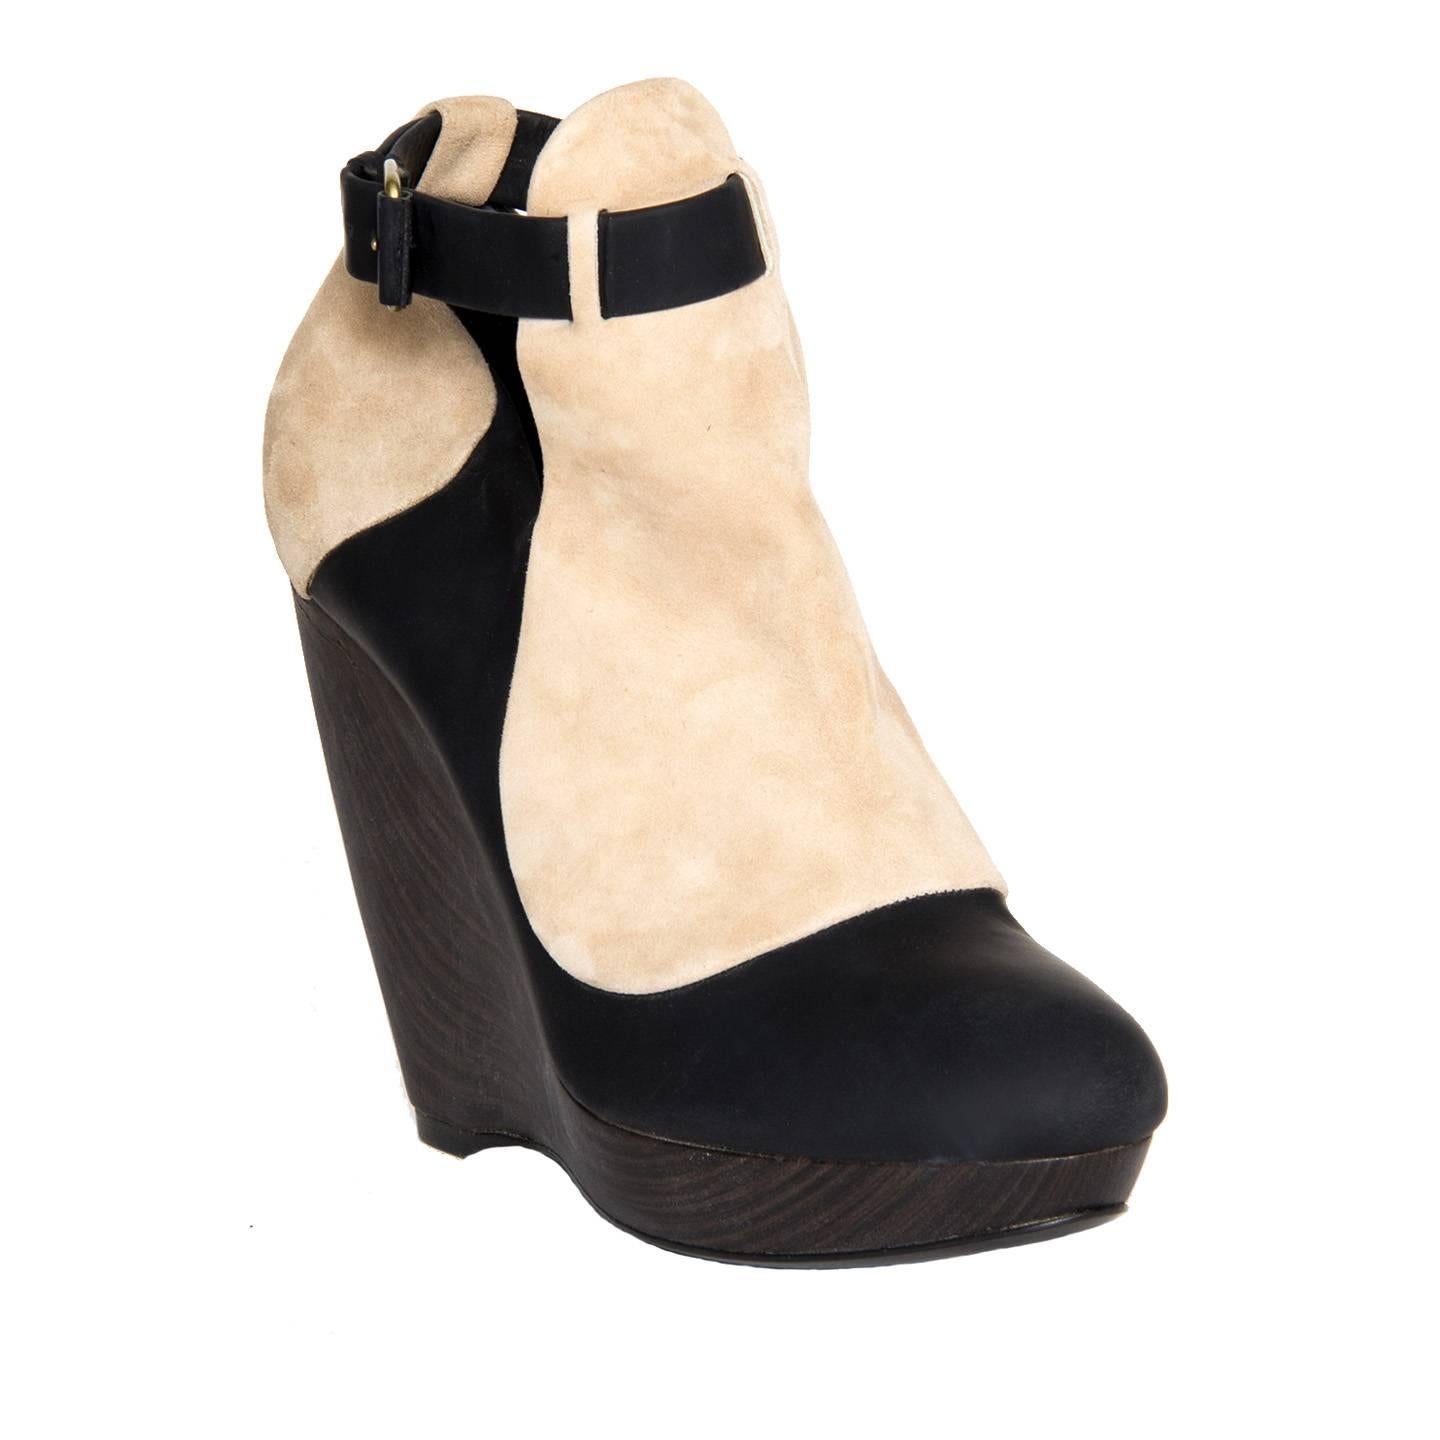 Black neoprene and beige suede wedges with ankle strap closure and brushed gold buckle. The wedge are made of dark brown wood with a rounded profile detail. Made in Italy.

Wedge heel: Front 1